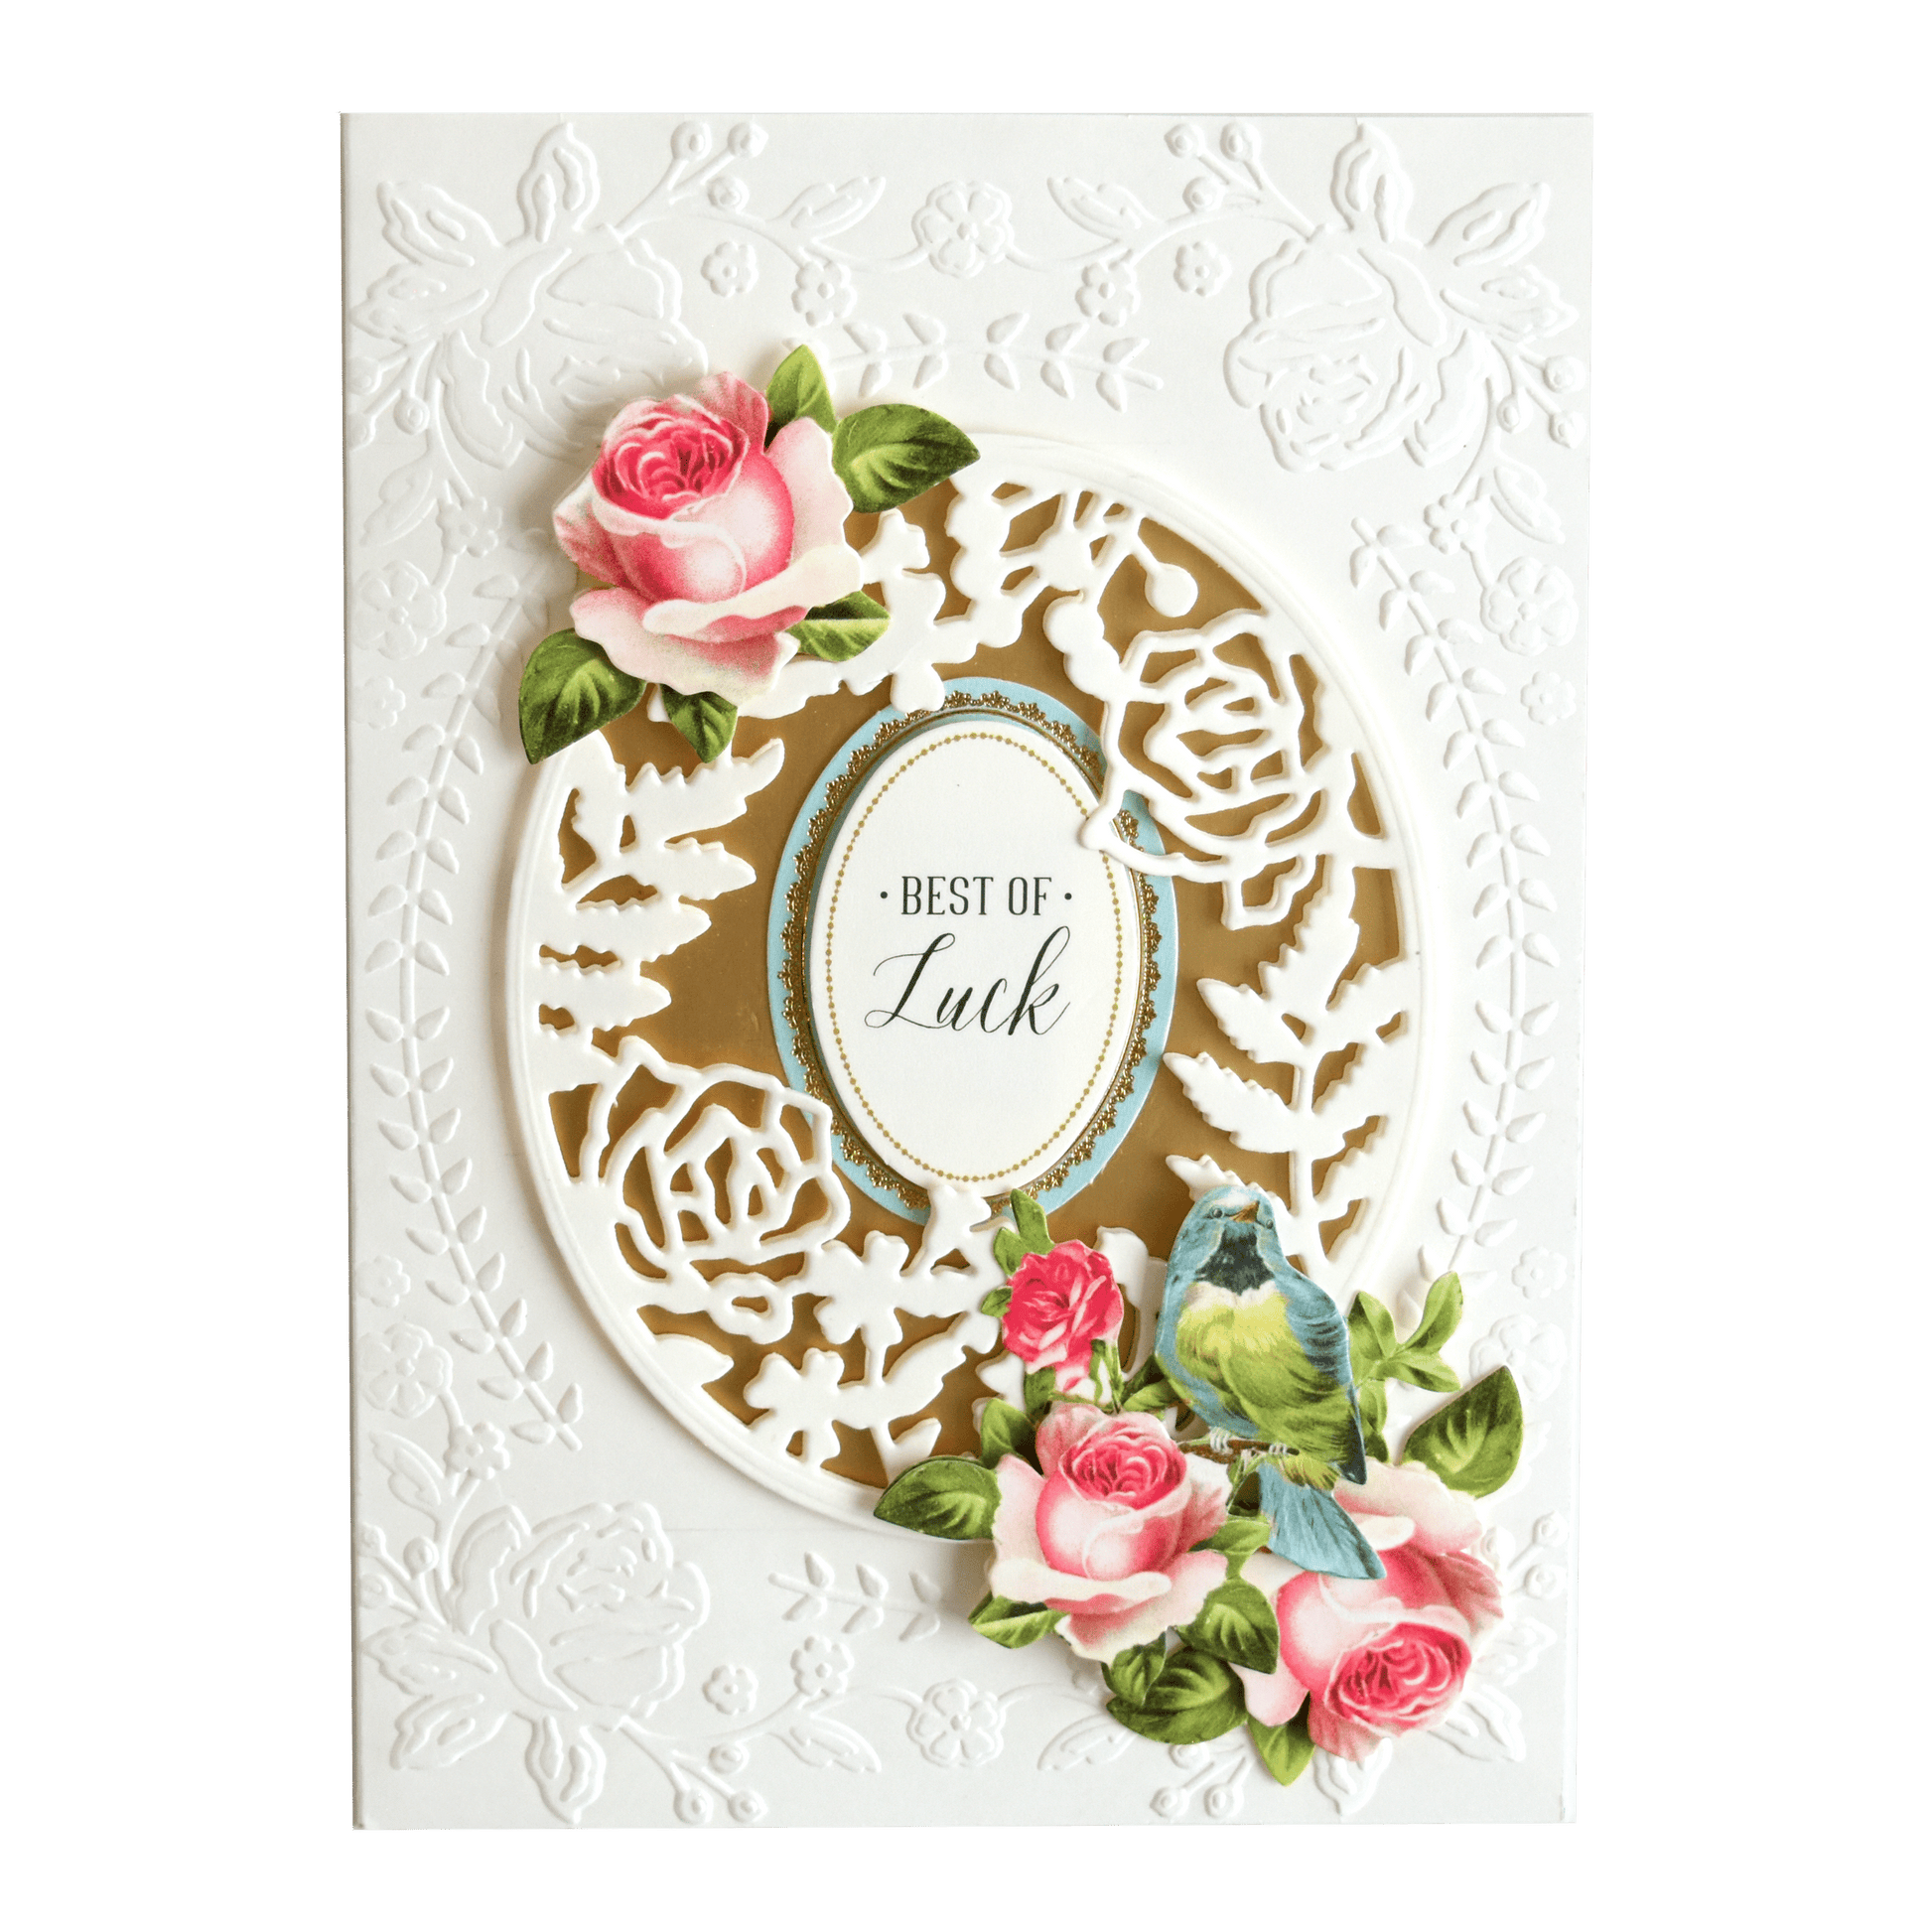 Cardmaking with Edge Dies – Craft Picnic